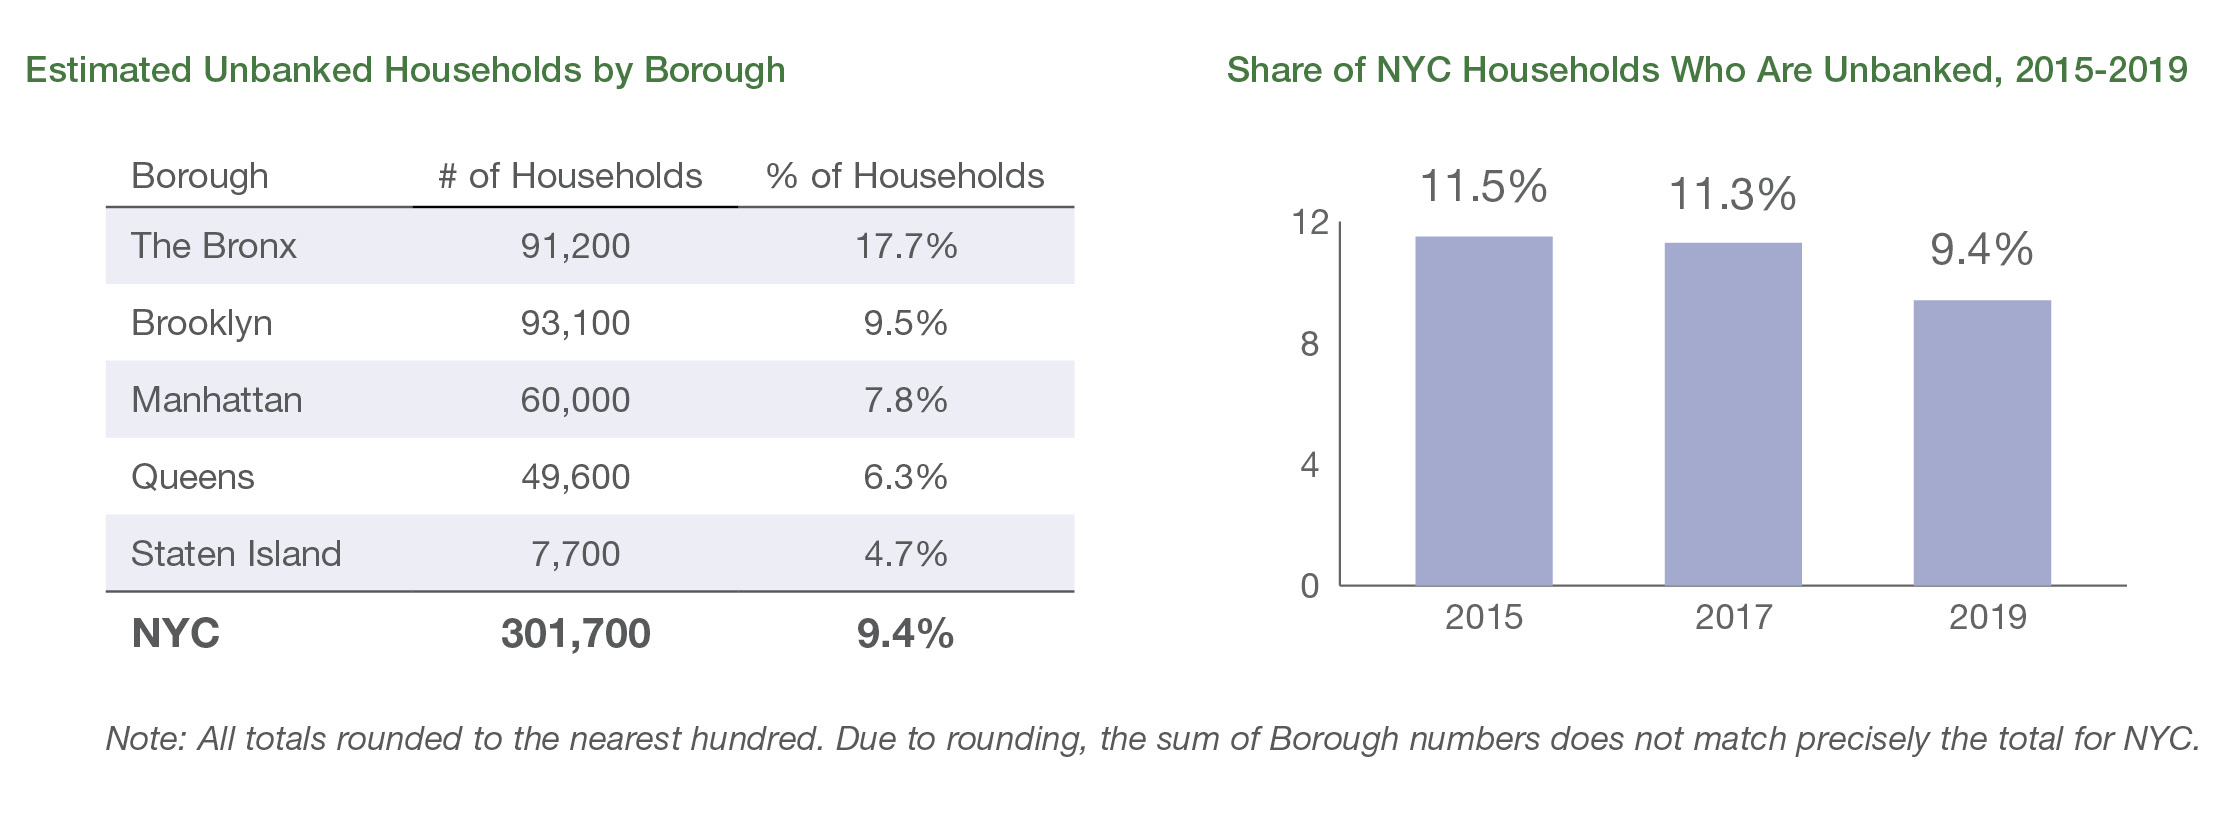 Chart breaking down unbanked households by borough